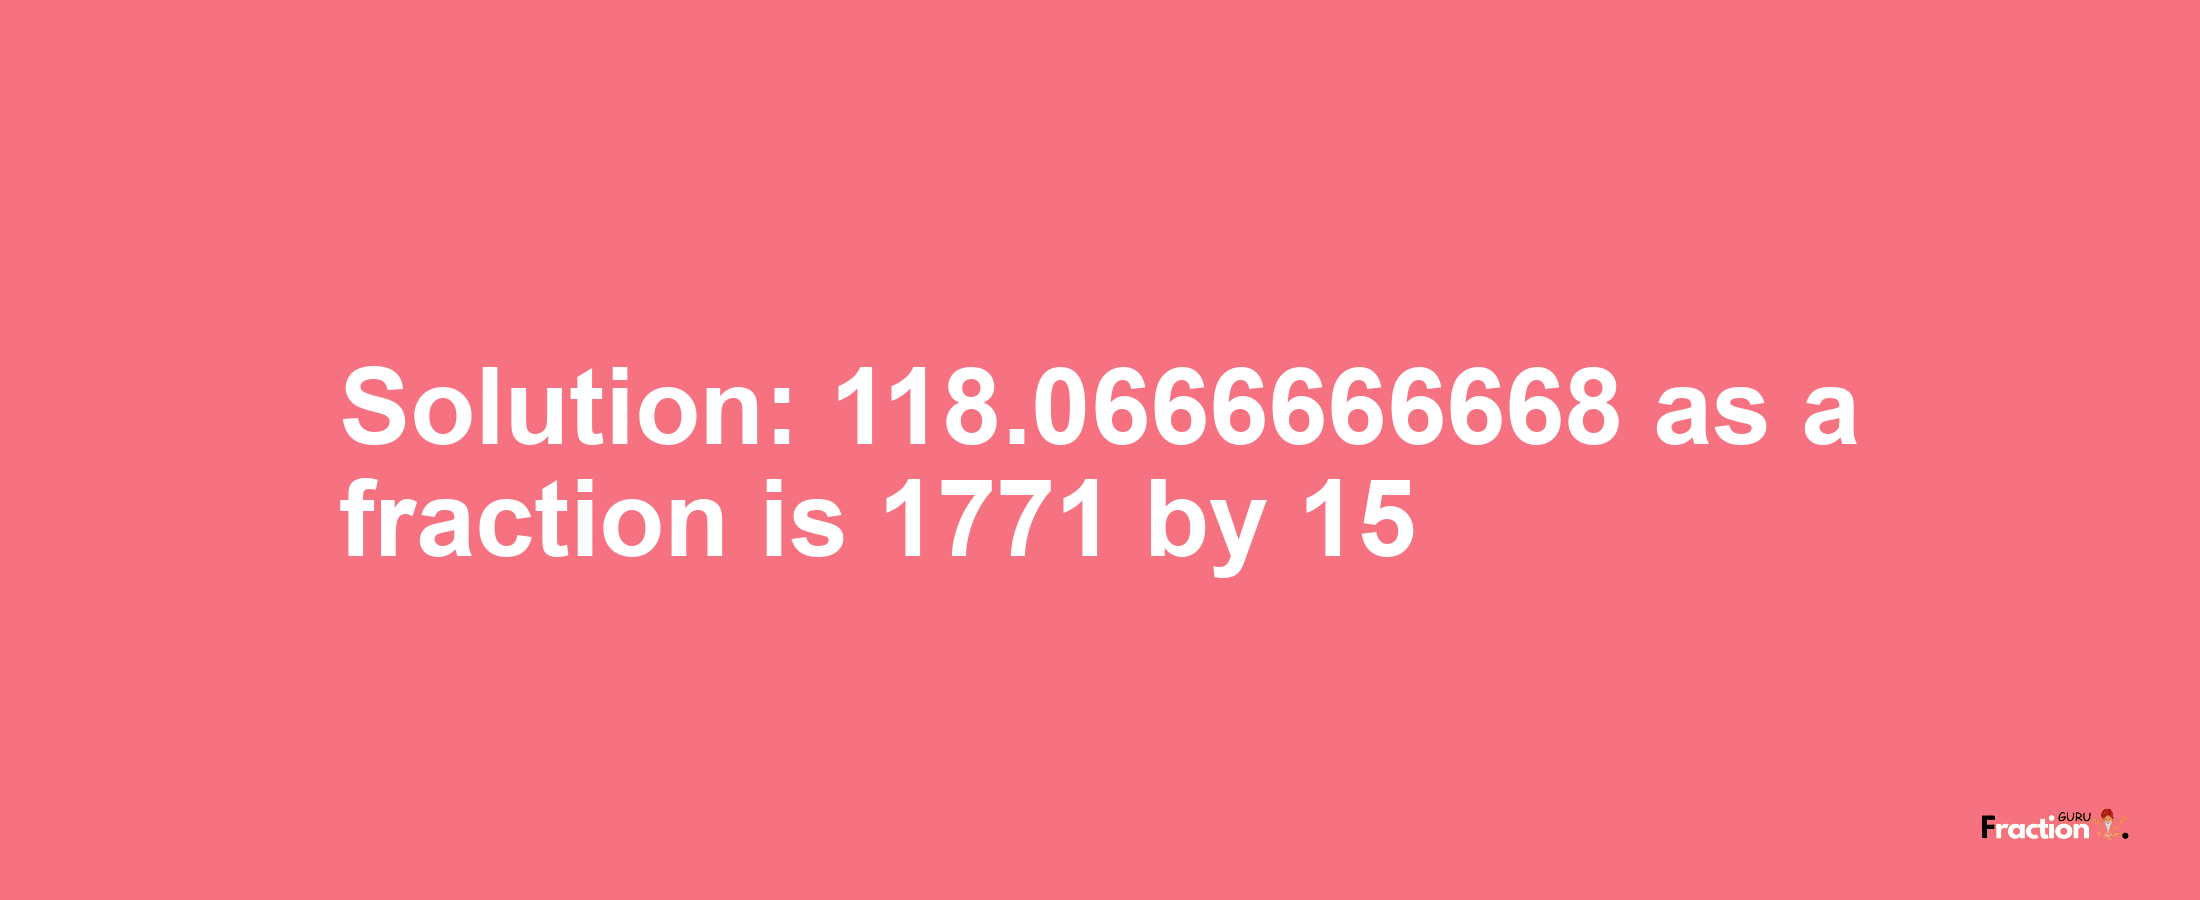 Solution:118.0666666668 as a fraction is 1771/15